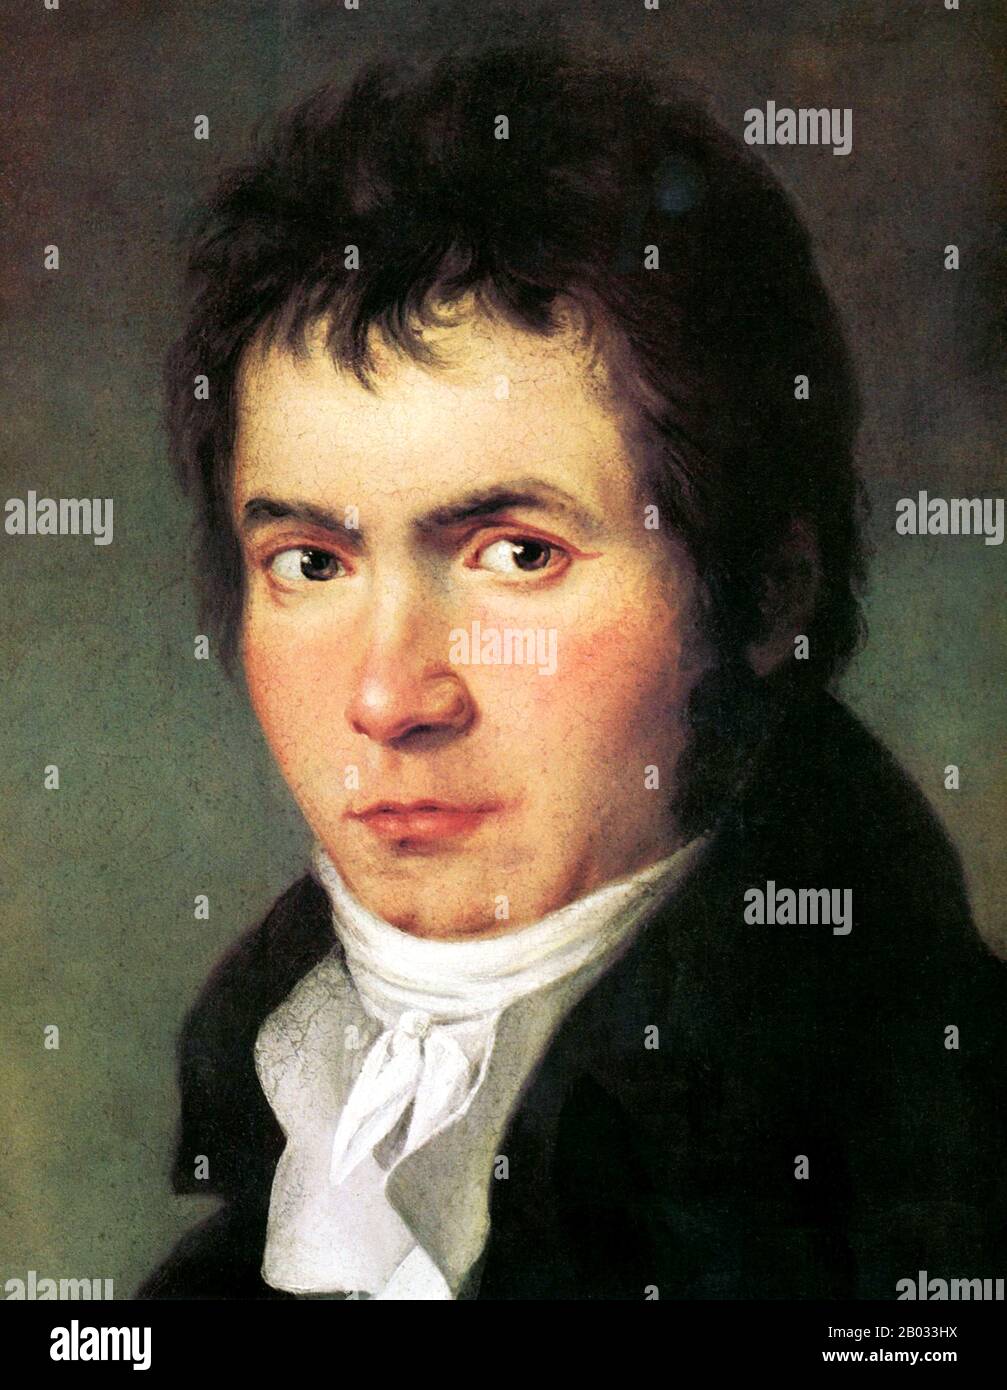 Ludwig van Beethoven (17 December 1770 – 26 March 1827) was a German  composer. A crucial figure in the transition between the Classical and  Romantic eras in Western art music, he remains